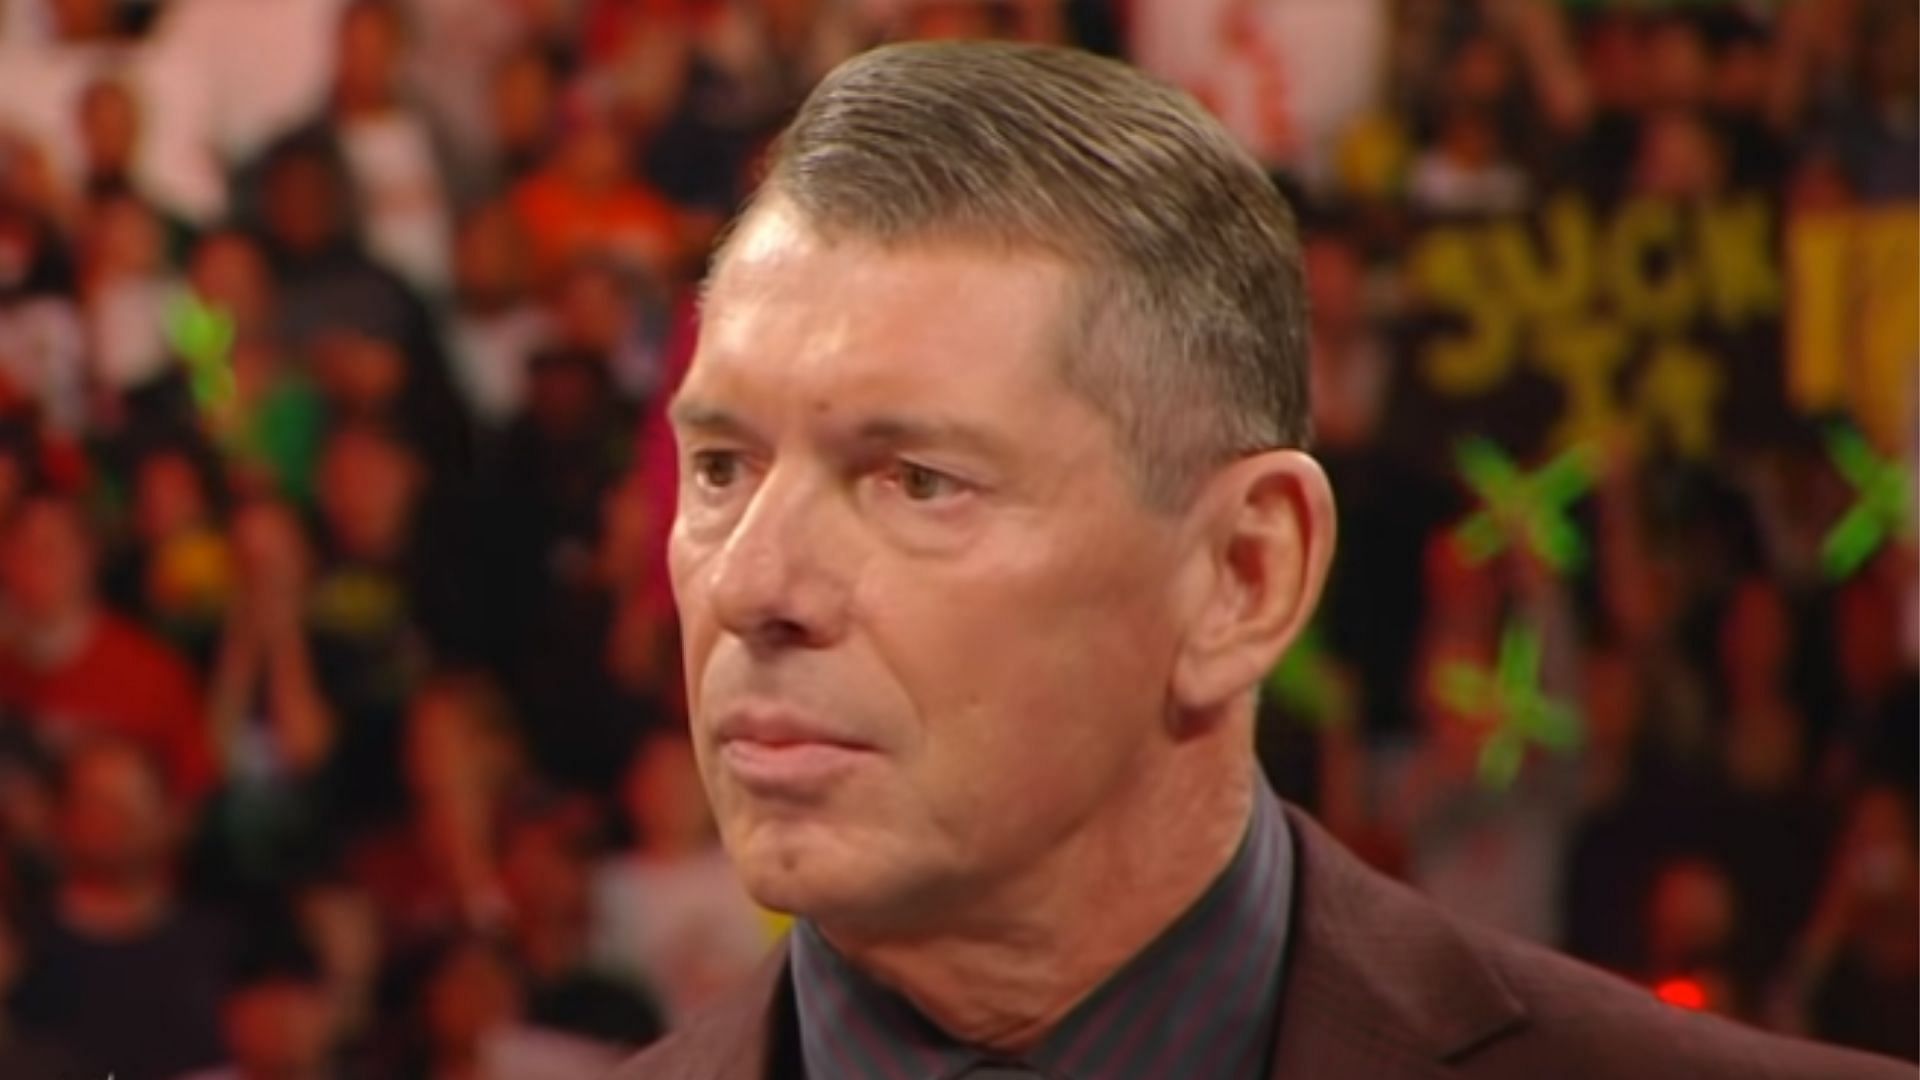 WWE Chairman Vince McMahon spoke to Rene Dupree about returning